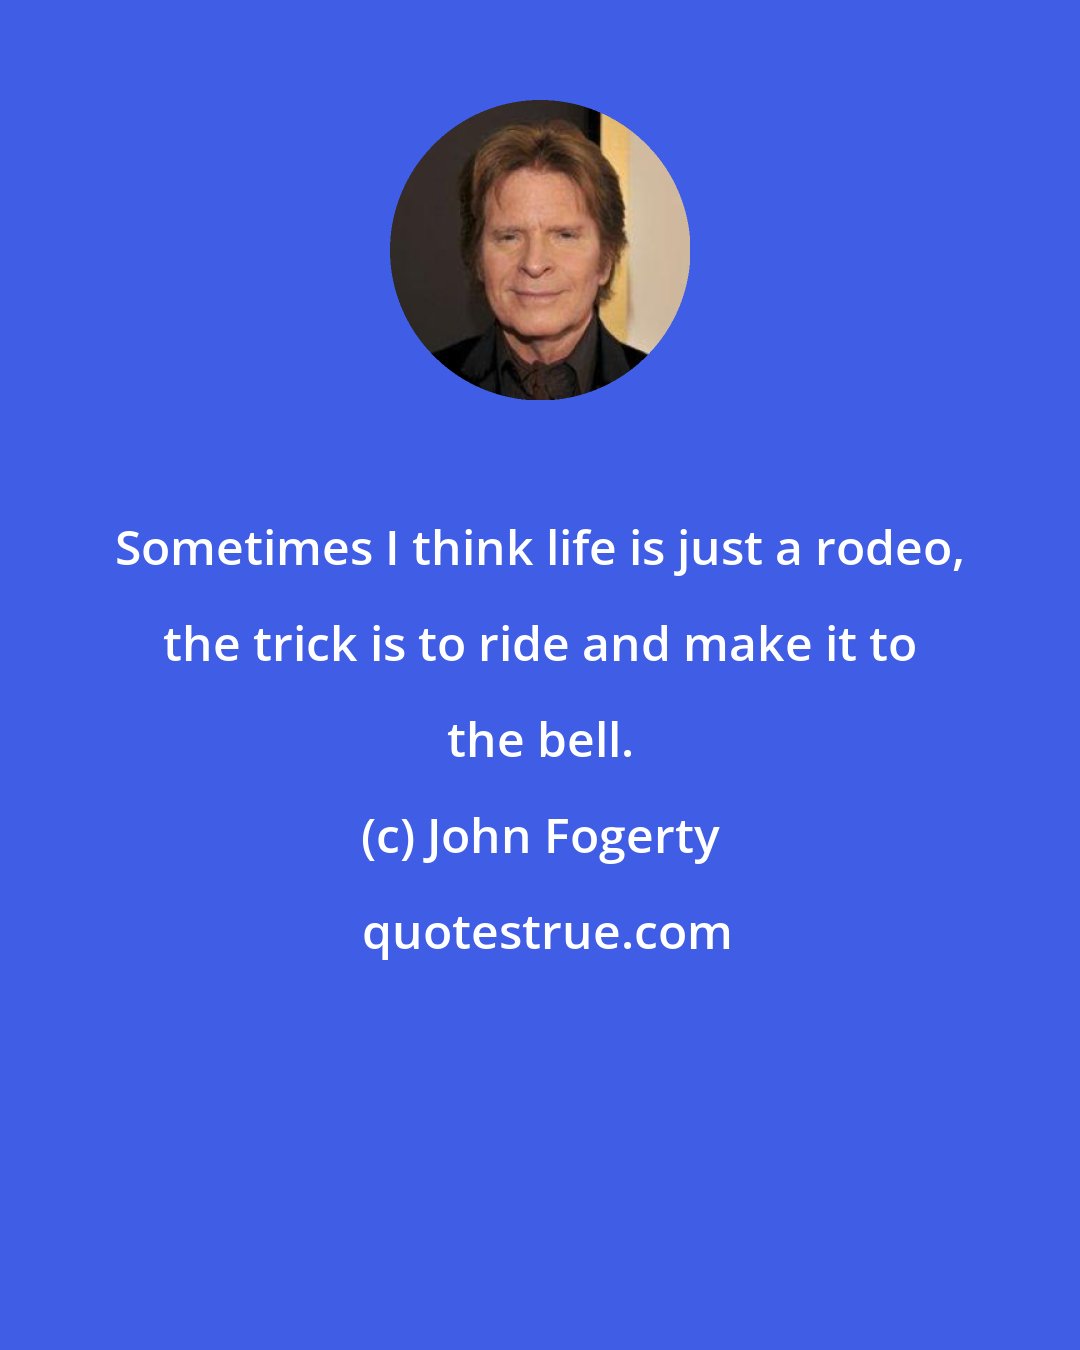 John Fogerty: Sometimes I think life is just a rodeo, the trick is to ride and make it to the bell.